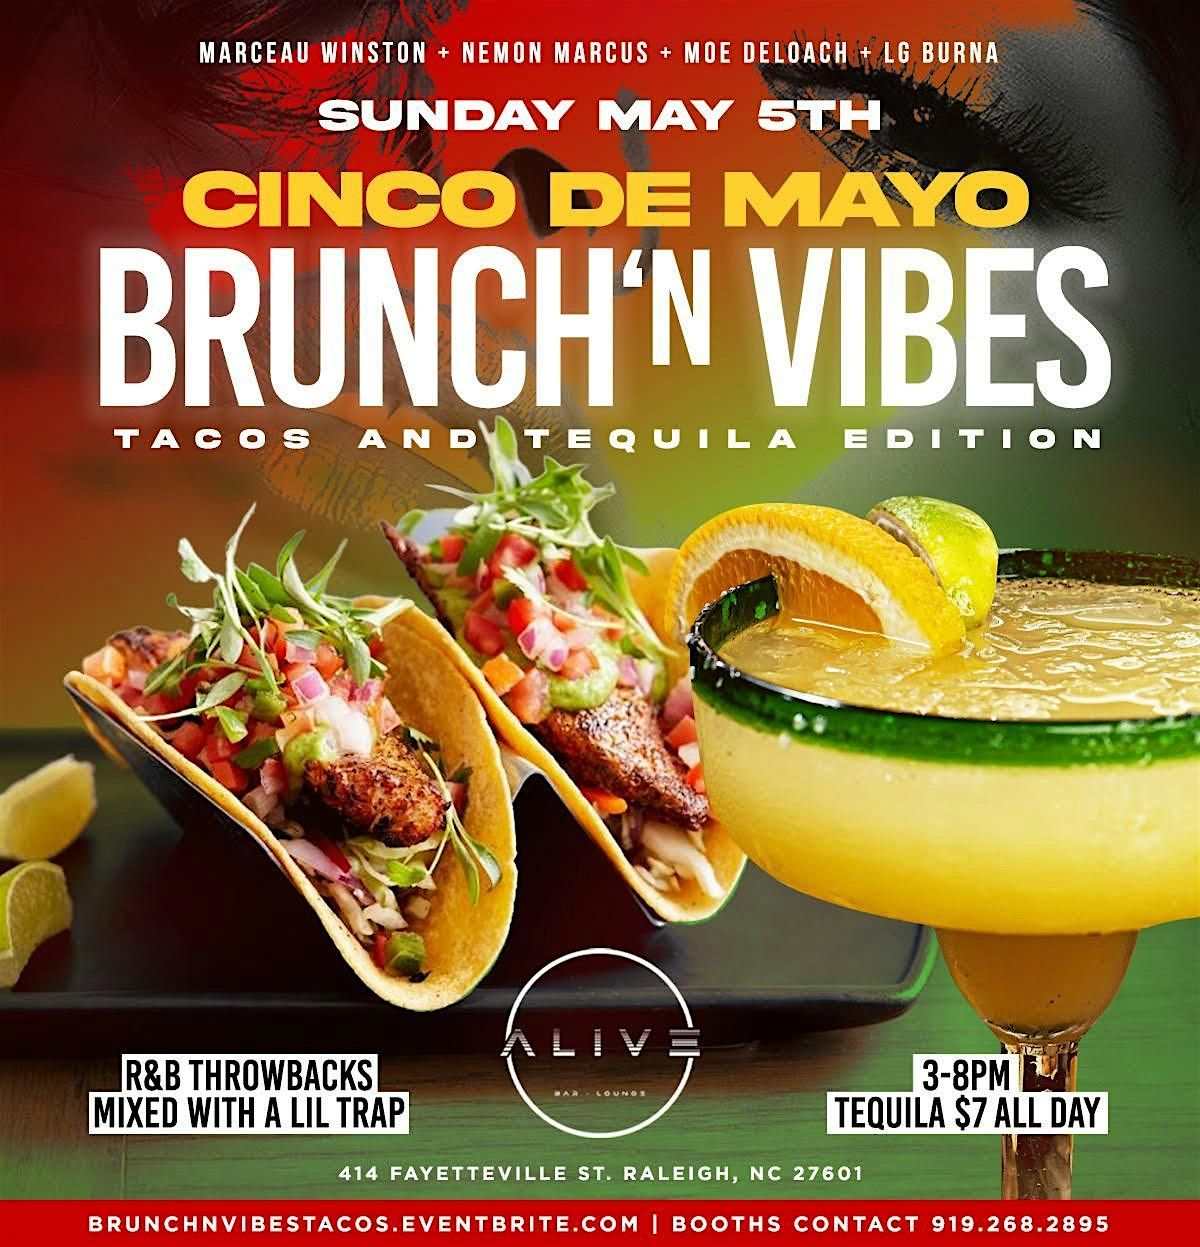 Brunch N' Vibes - Taco's and Tequila Edition - Cinco De Mayo Day Party